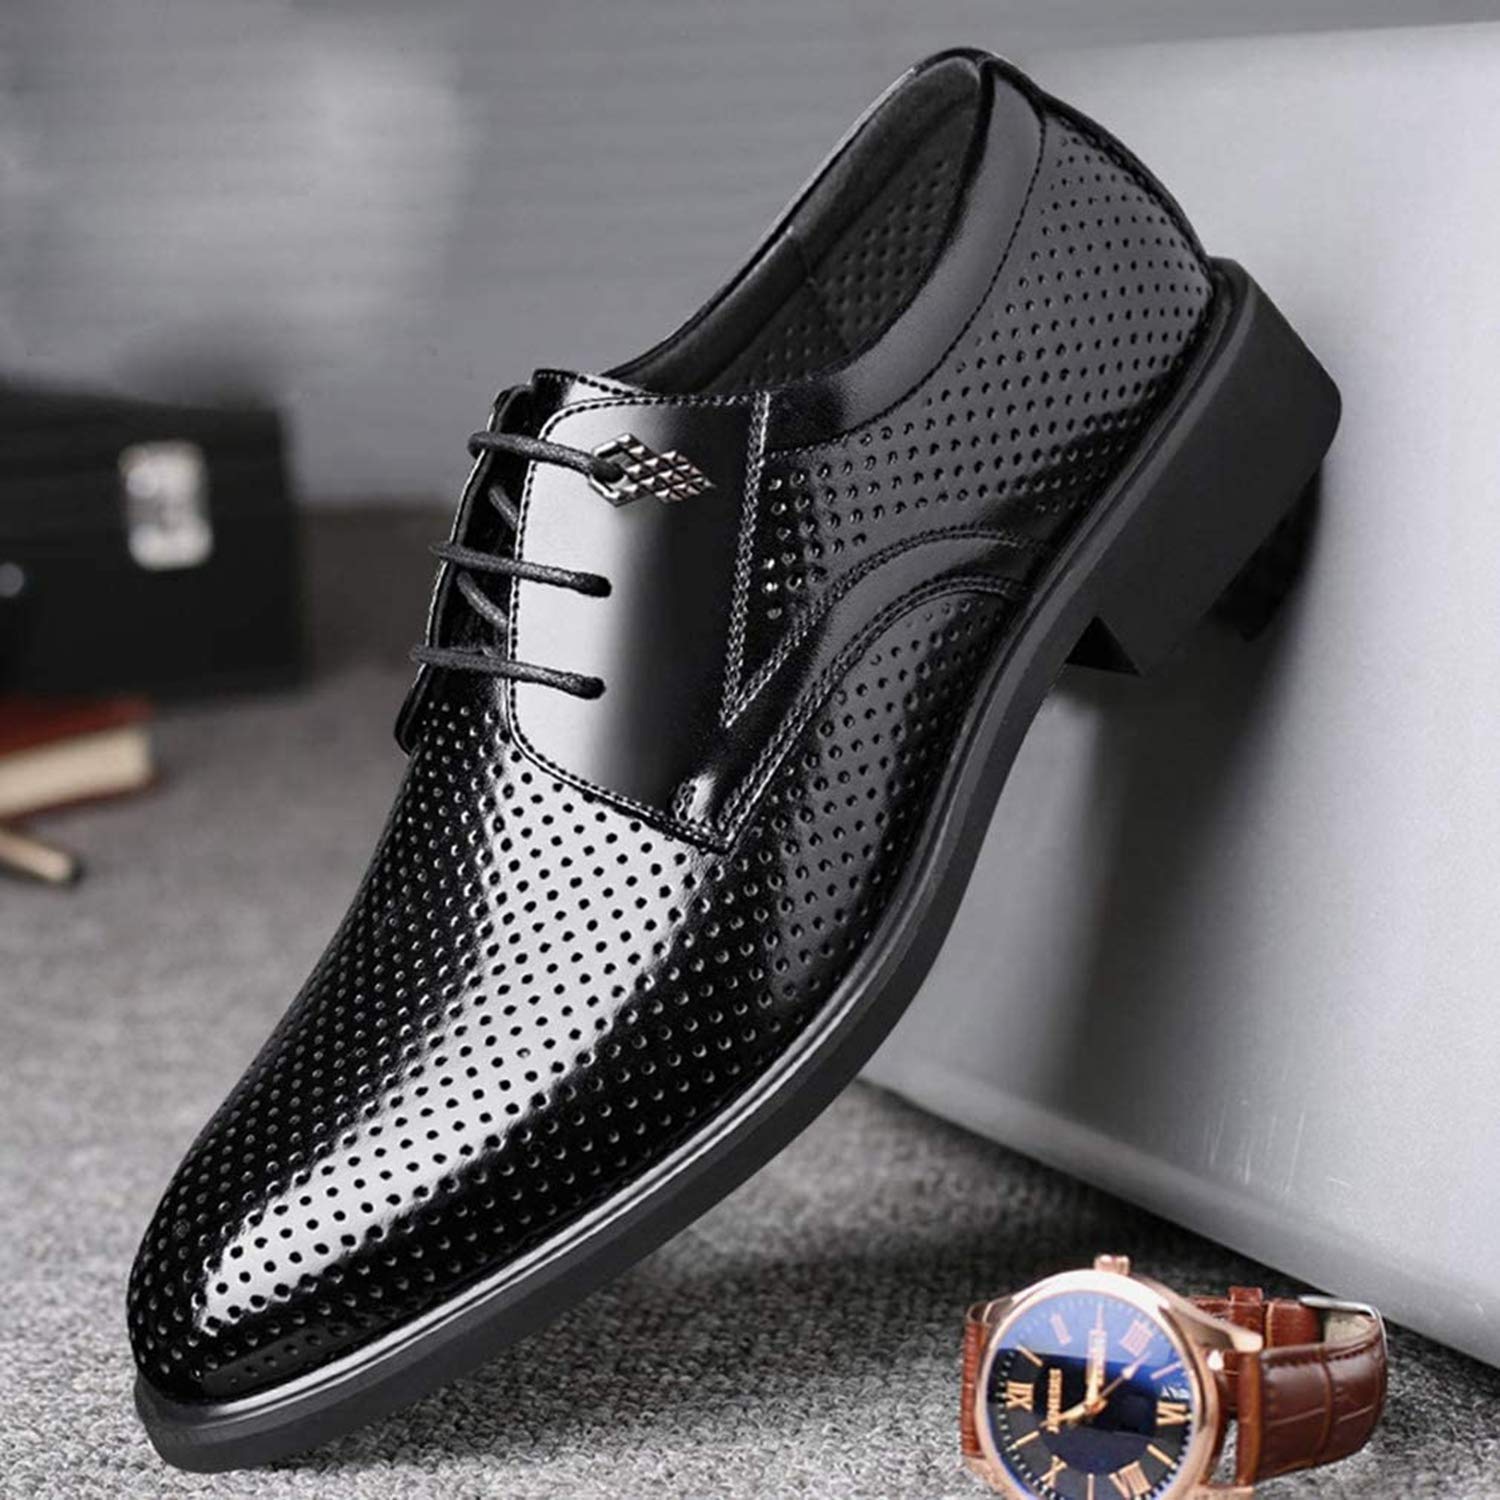 WEWIN Business Shoes, Mesh, Men's, Sandals, Leather Shoes, Large Sizes, Men's Shoes, Leather Shoes, Walking, Casual, Lightweight, Comfortable, Non-stuffy, Odor Resistant, Breathable